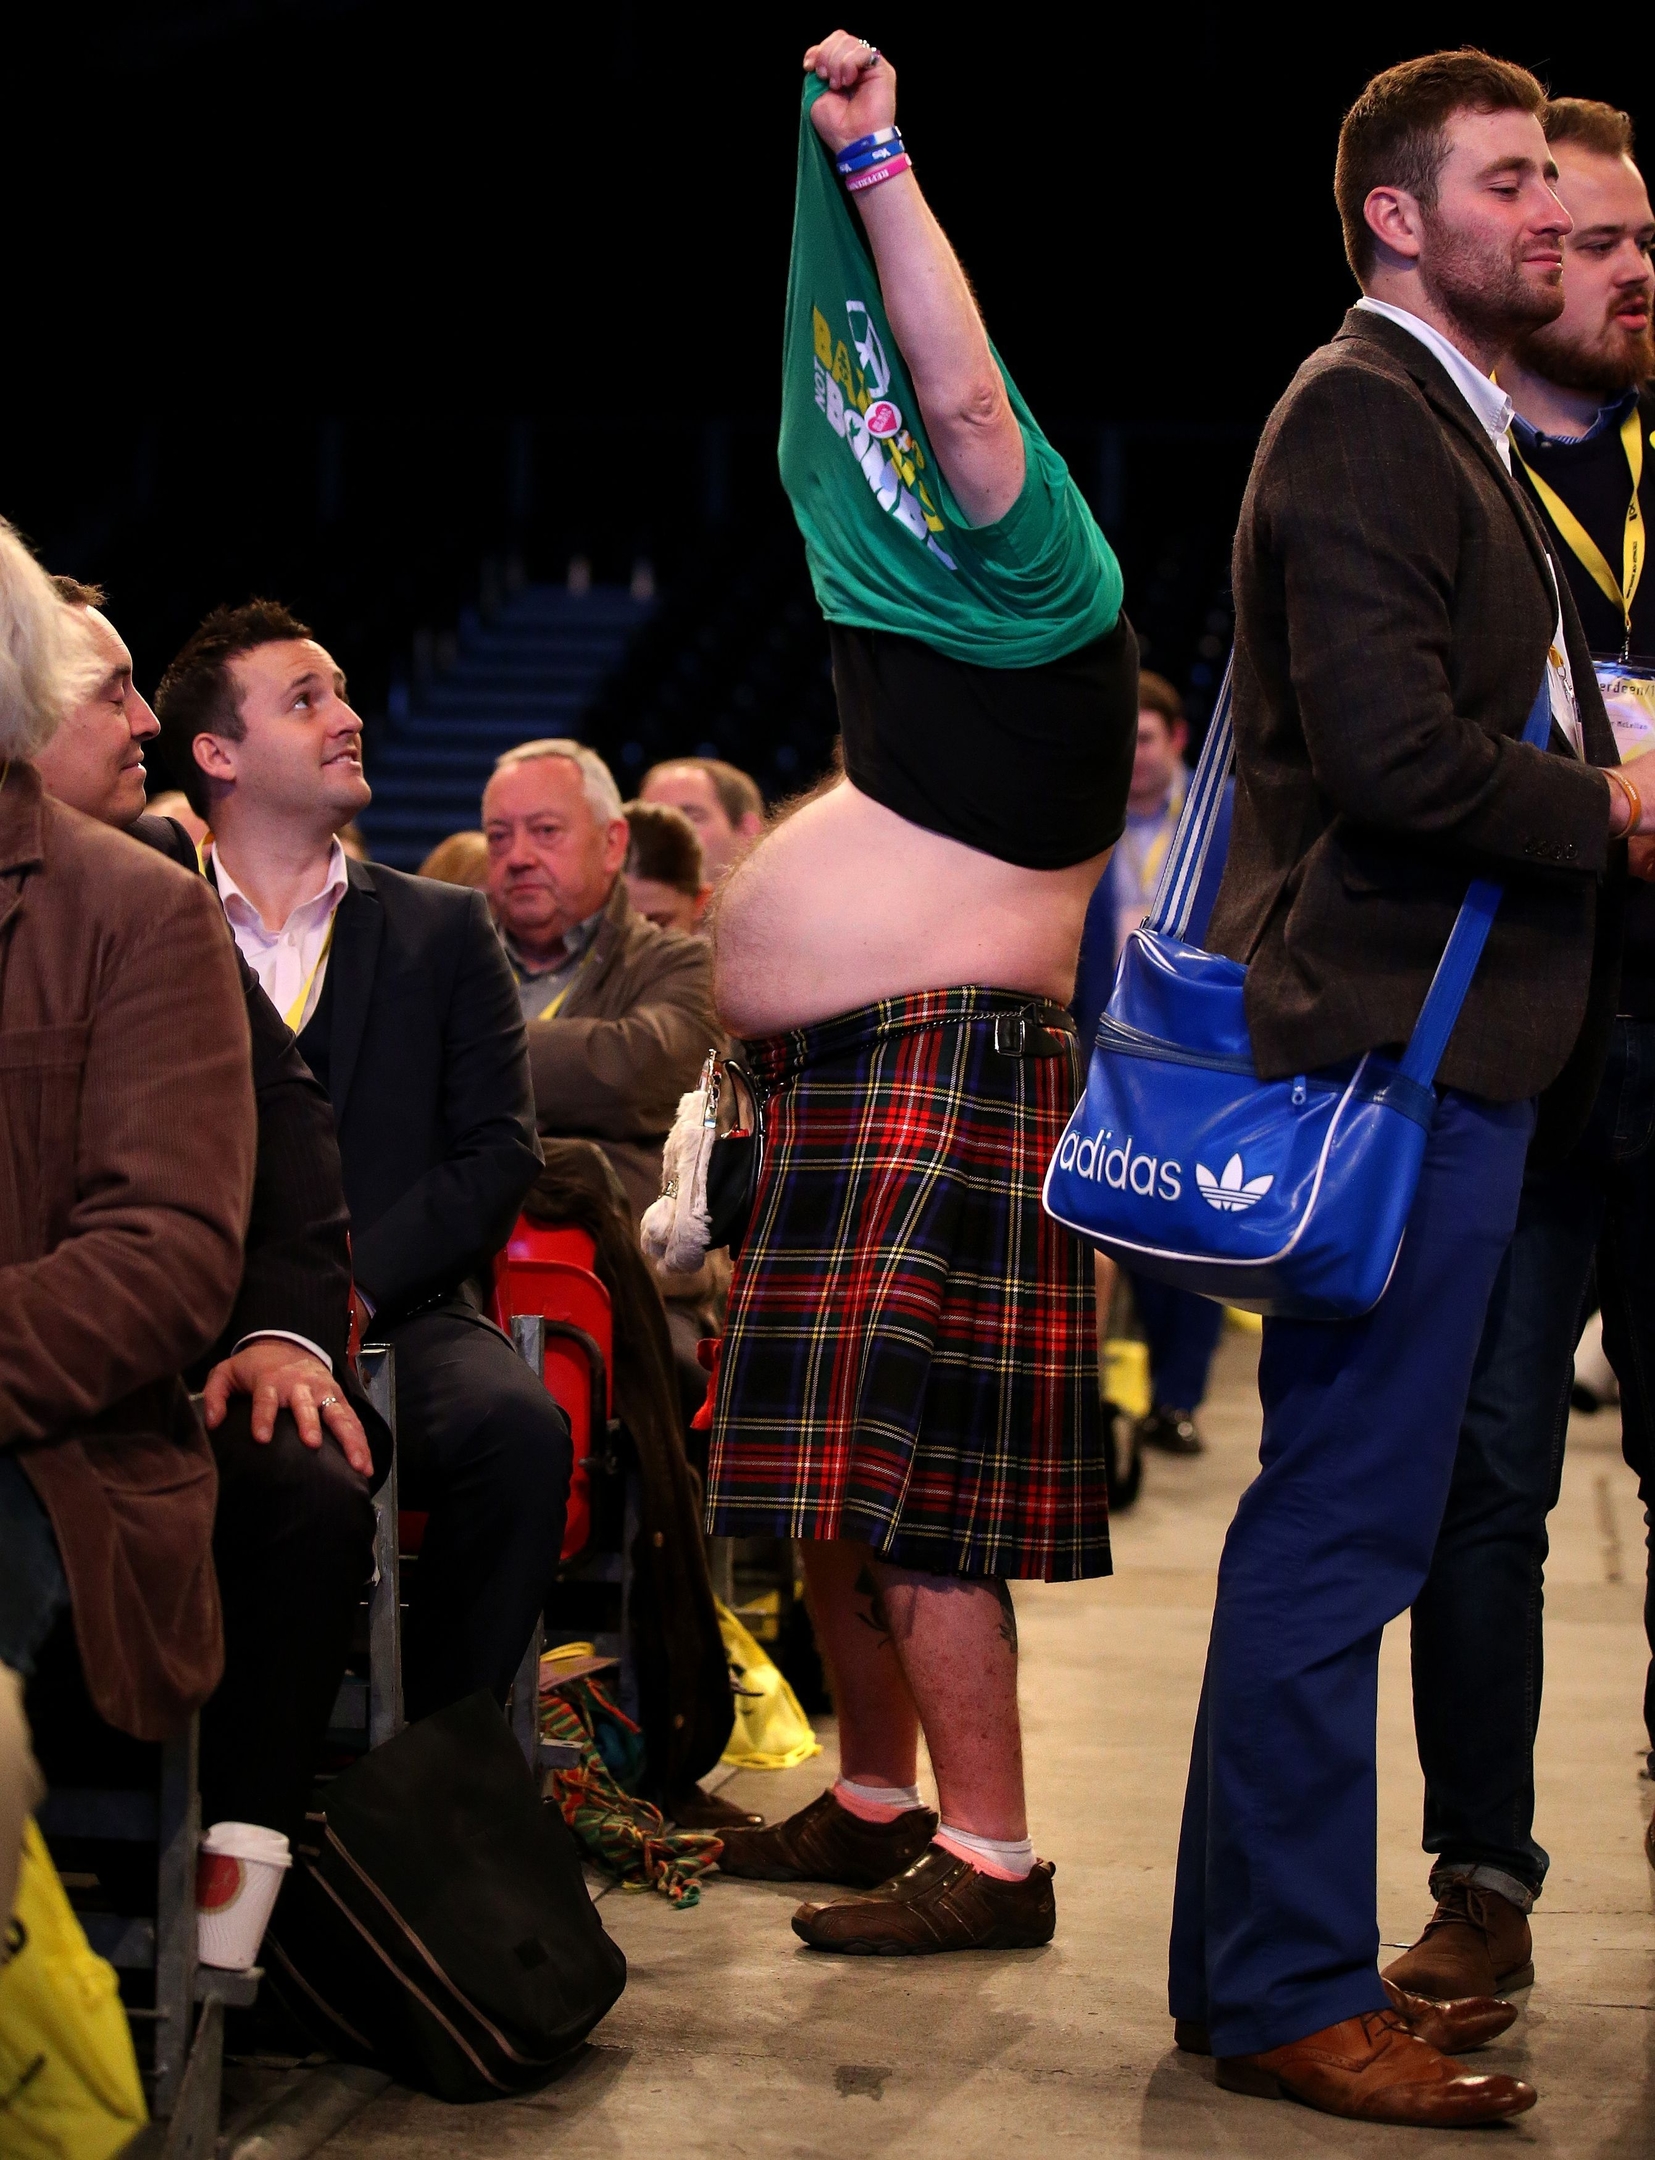 SNP supporter Steve Davies changing his t-shirt in the conference hall at the SNP National Conference